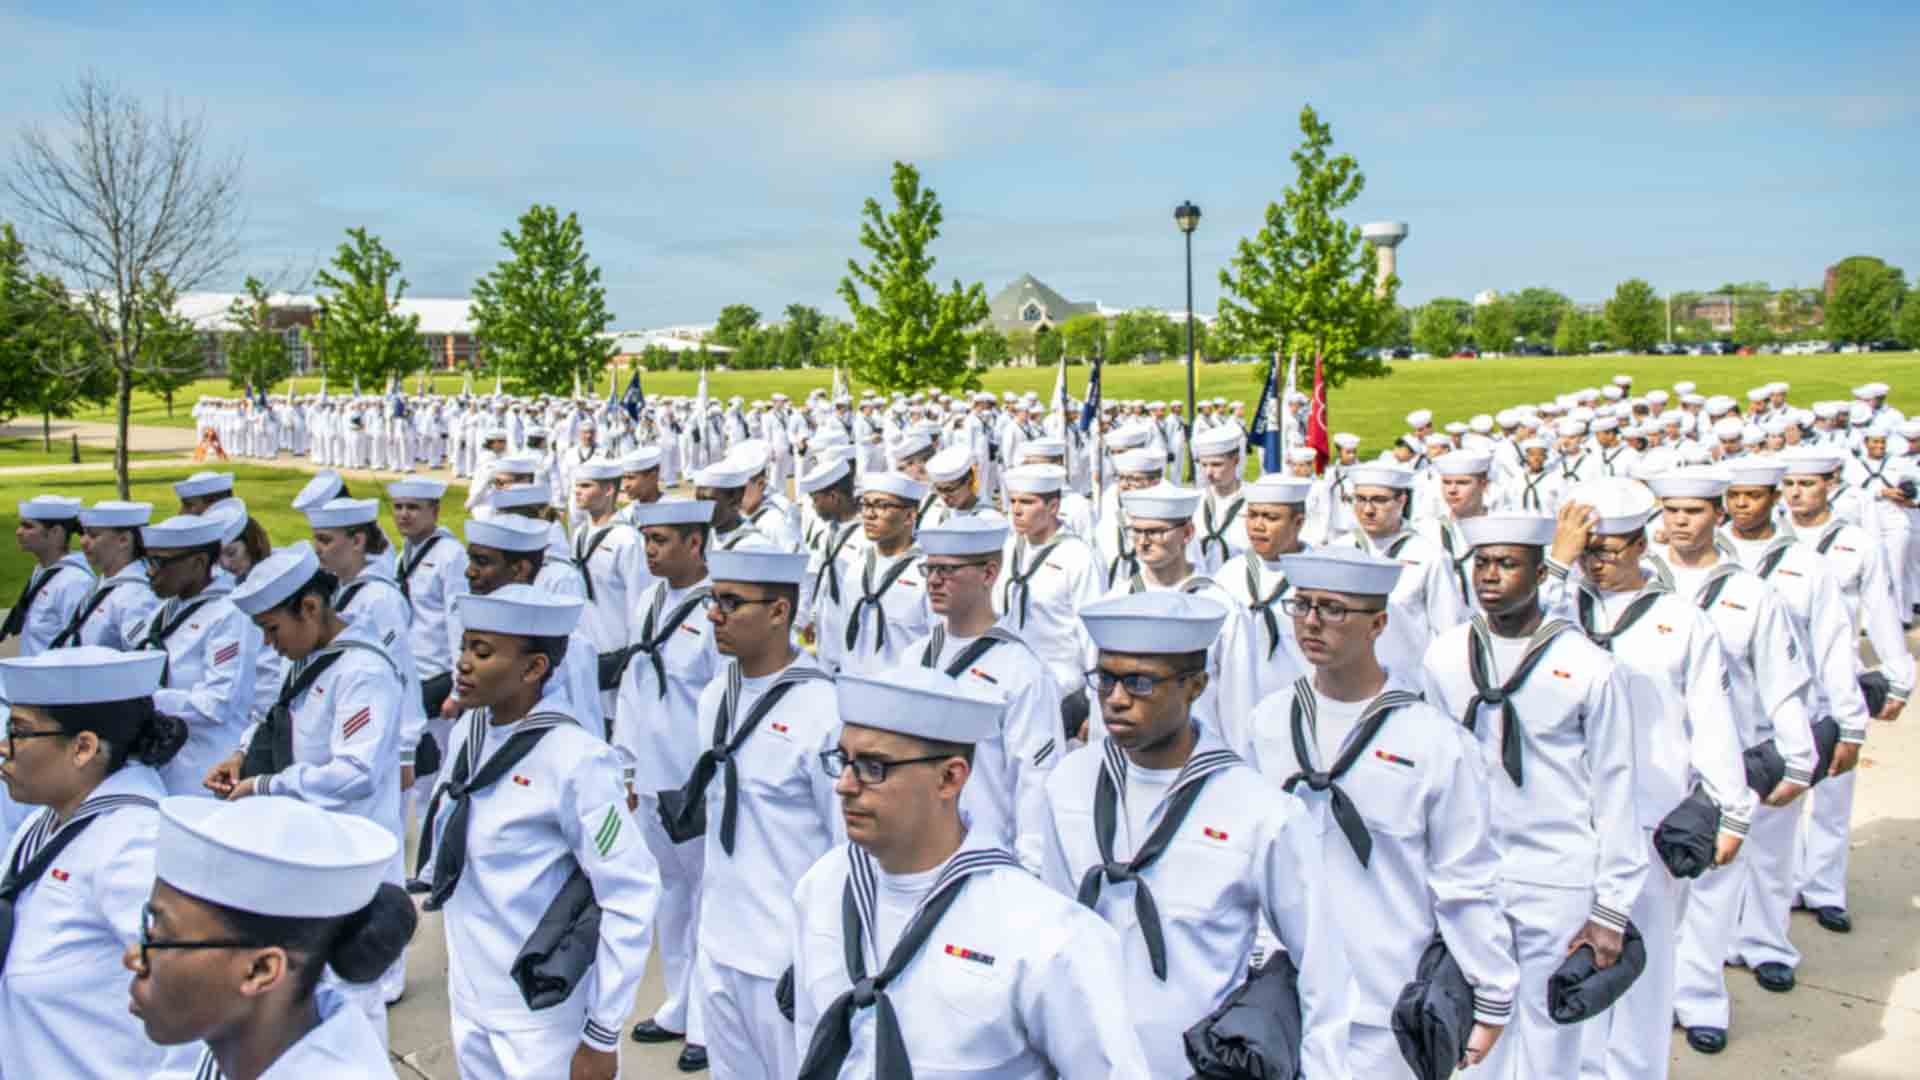 Joining the United States Navy How to Get Started